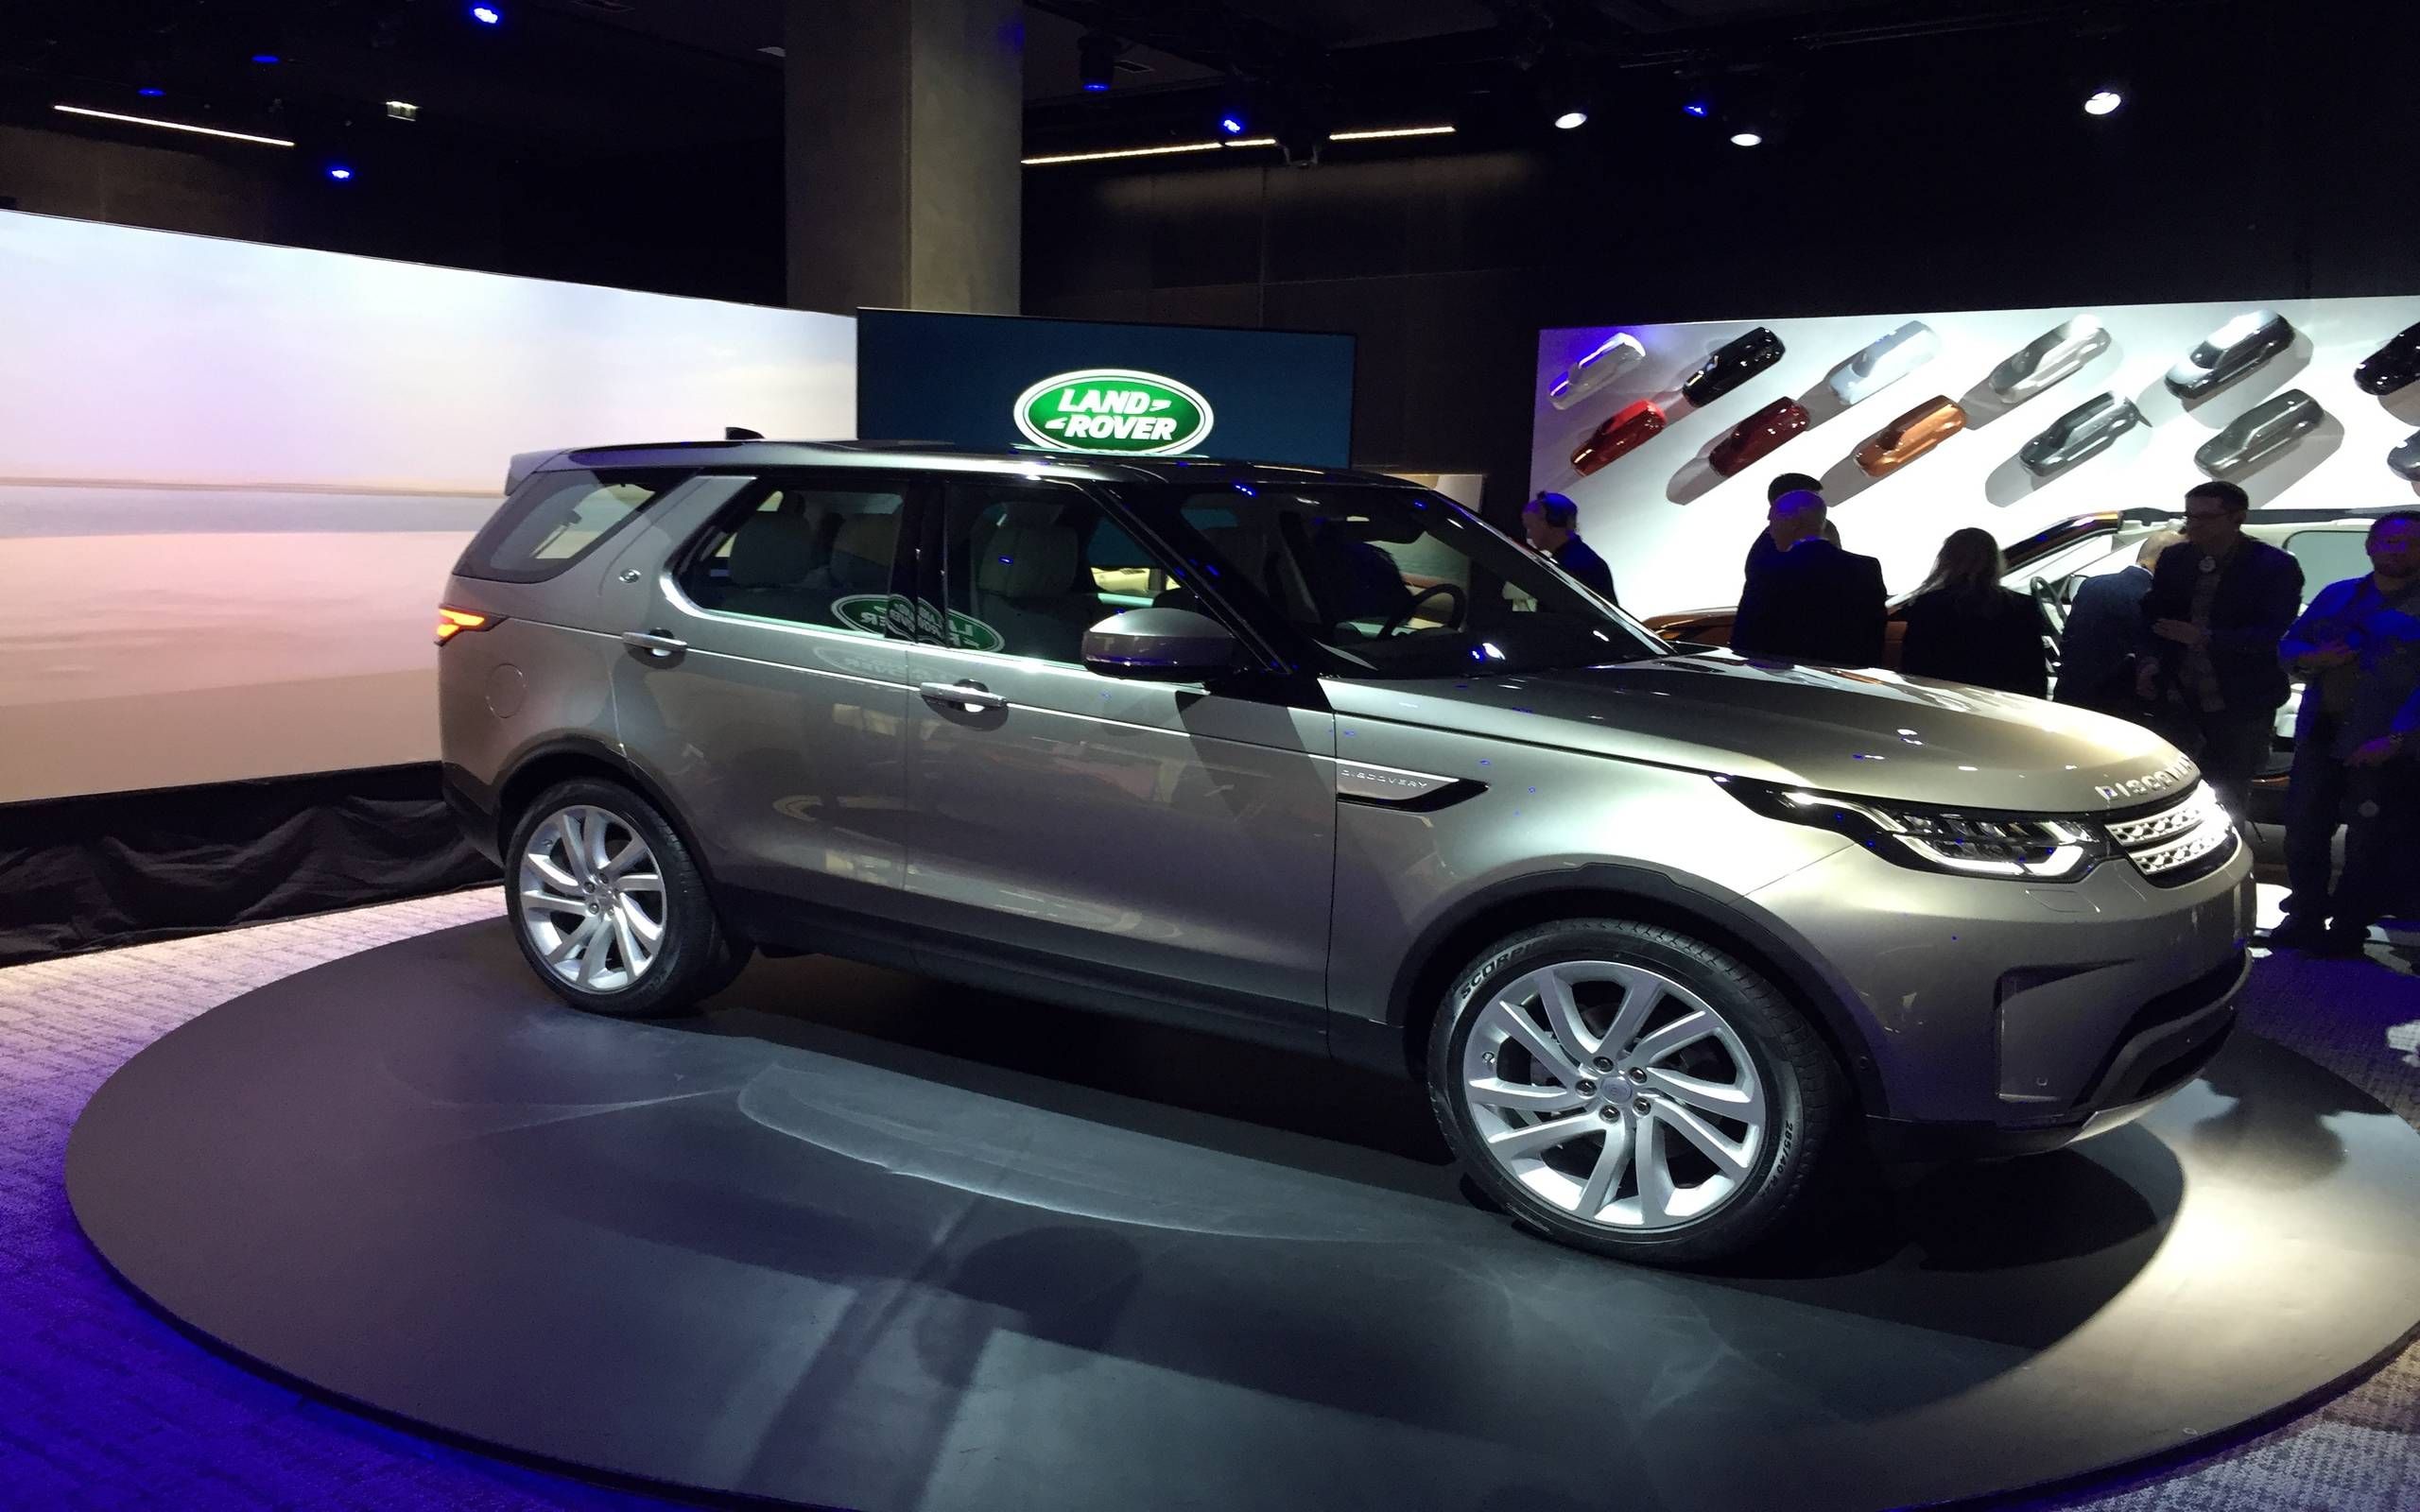 The 2017 Land Rover Discovery can seat 